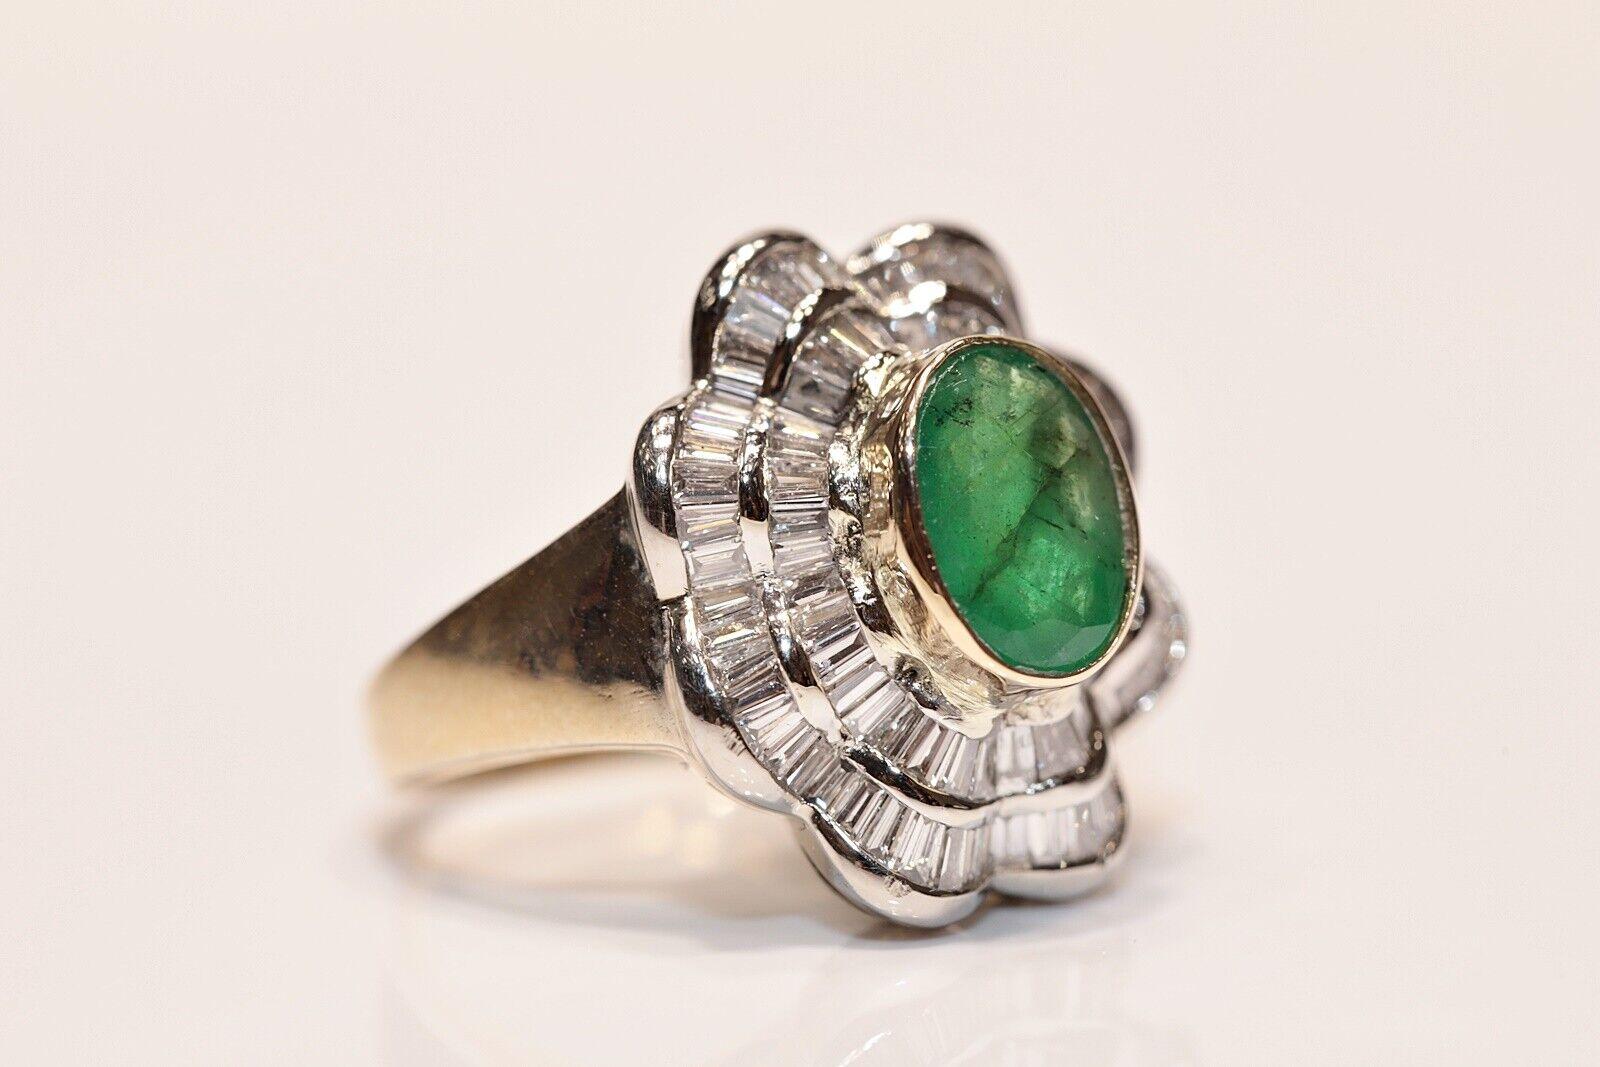 Vintage Circa 1980s 18k Gold Natural Baguette Cut Diamond And Emerald Ring  In Good Condition For Sale In Fatih/İstanbul, 34